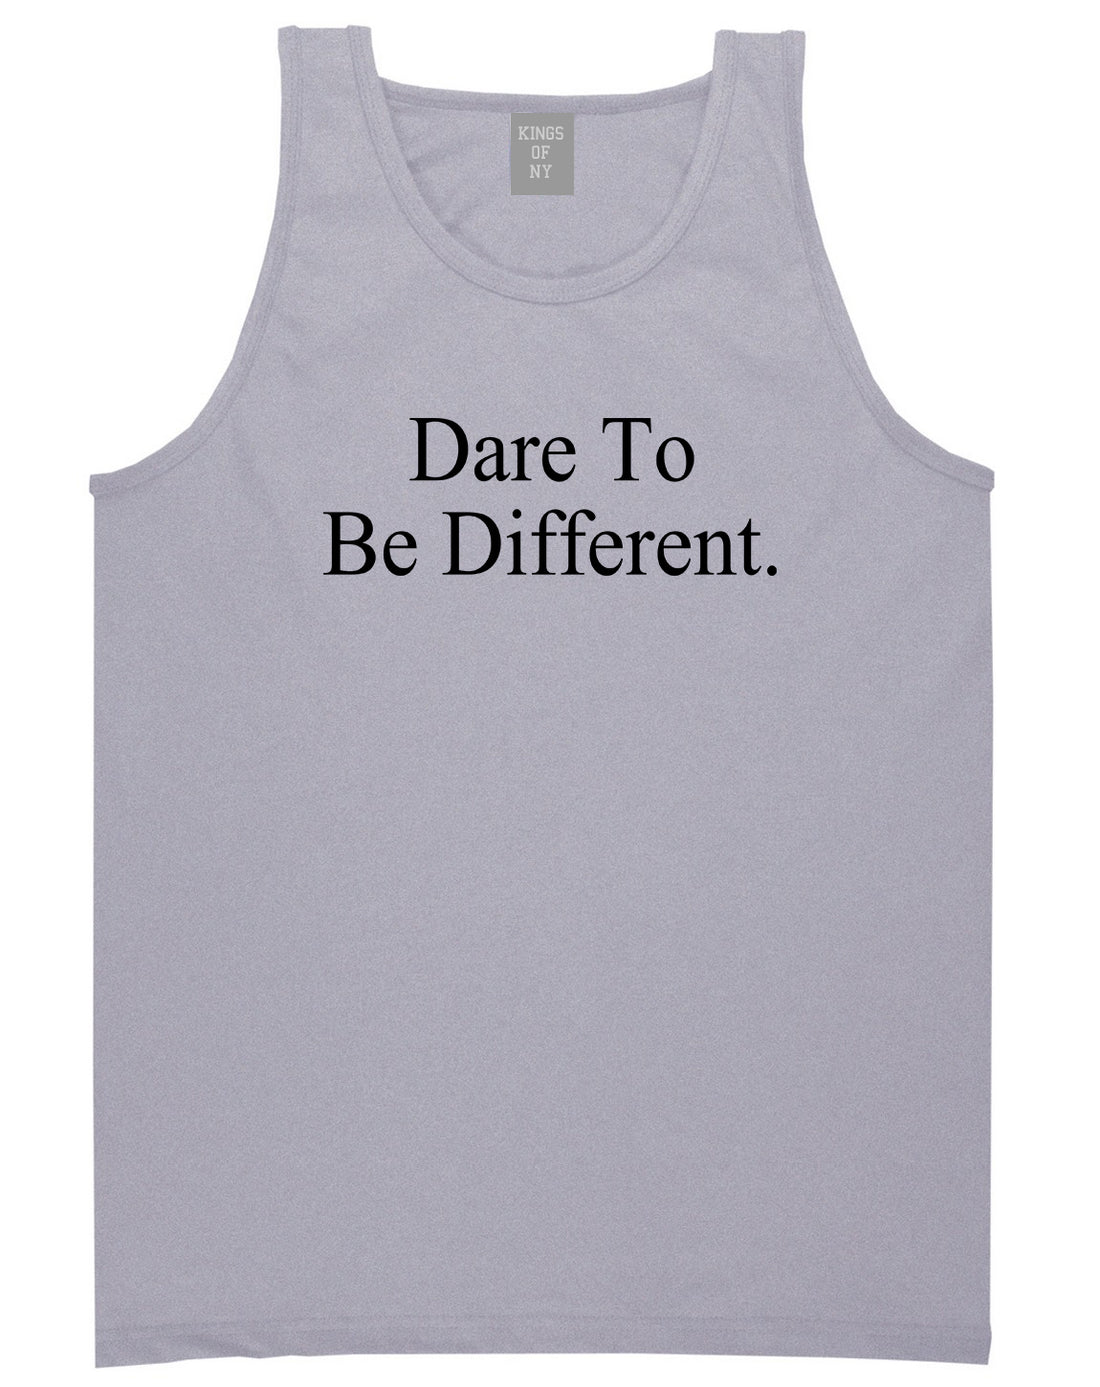 Dare_To_Be_Different Mens Grey Tank Top Shirt by Kings Of NY